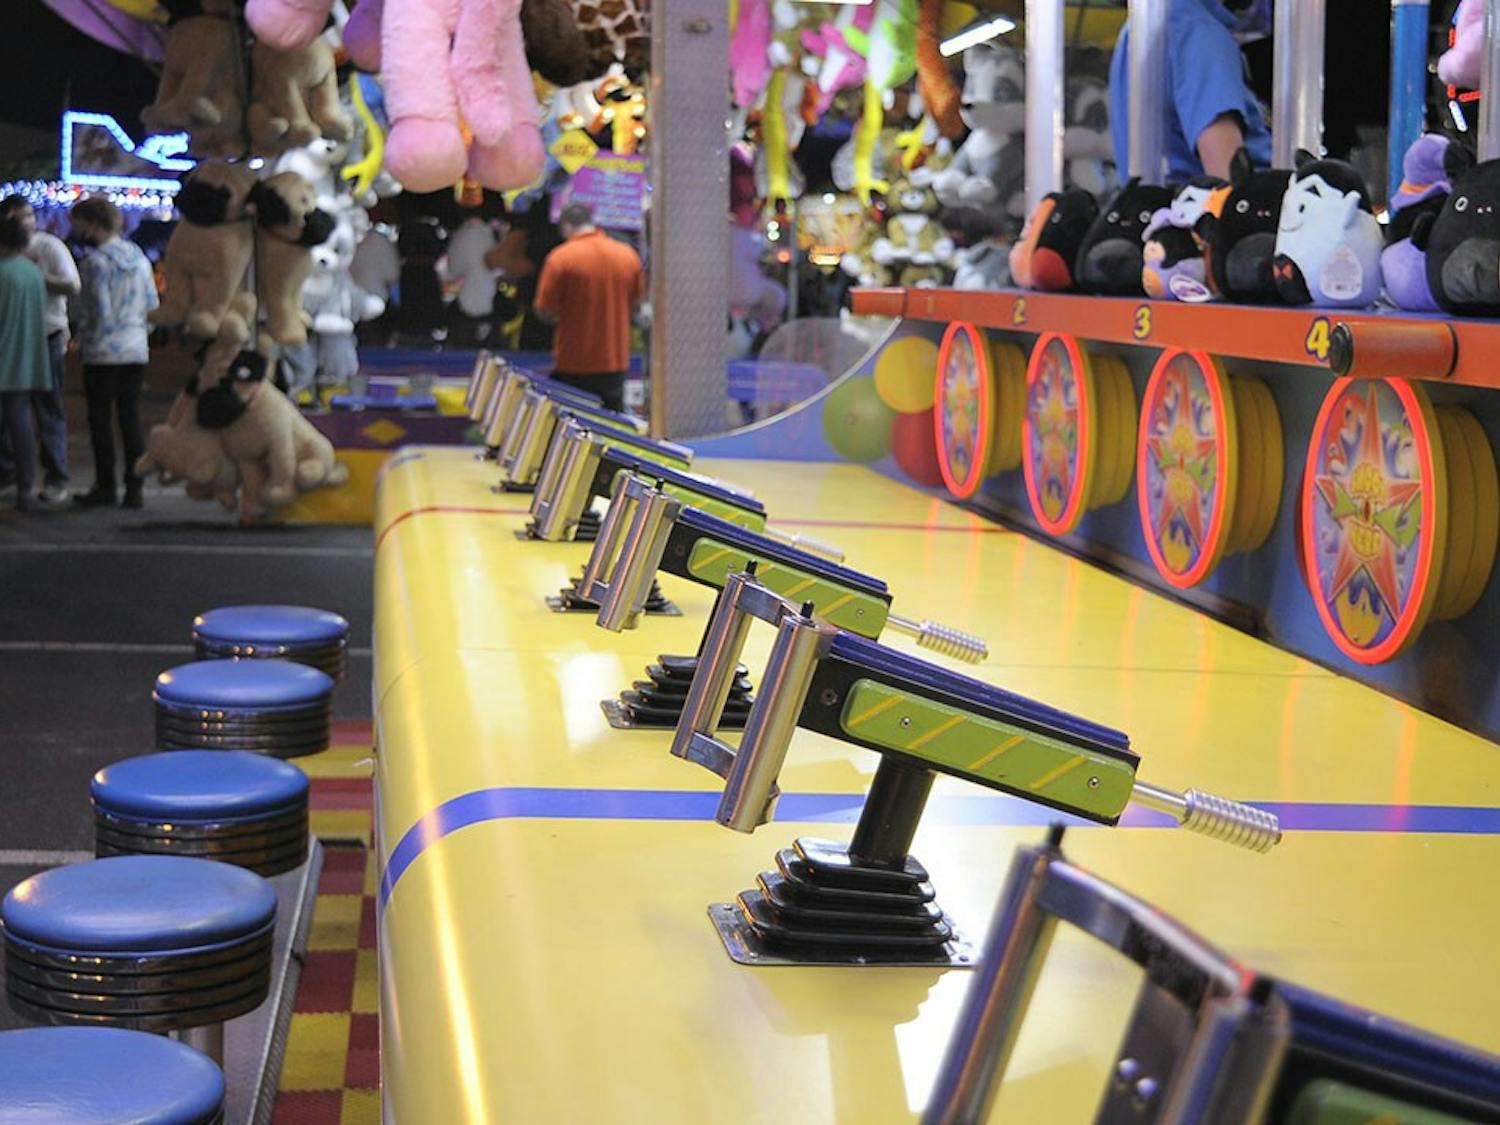 Empty stools await players at a squirt fun game booth at the State Fair.&nbsp;